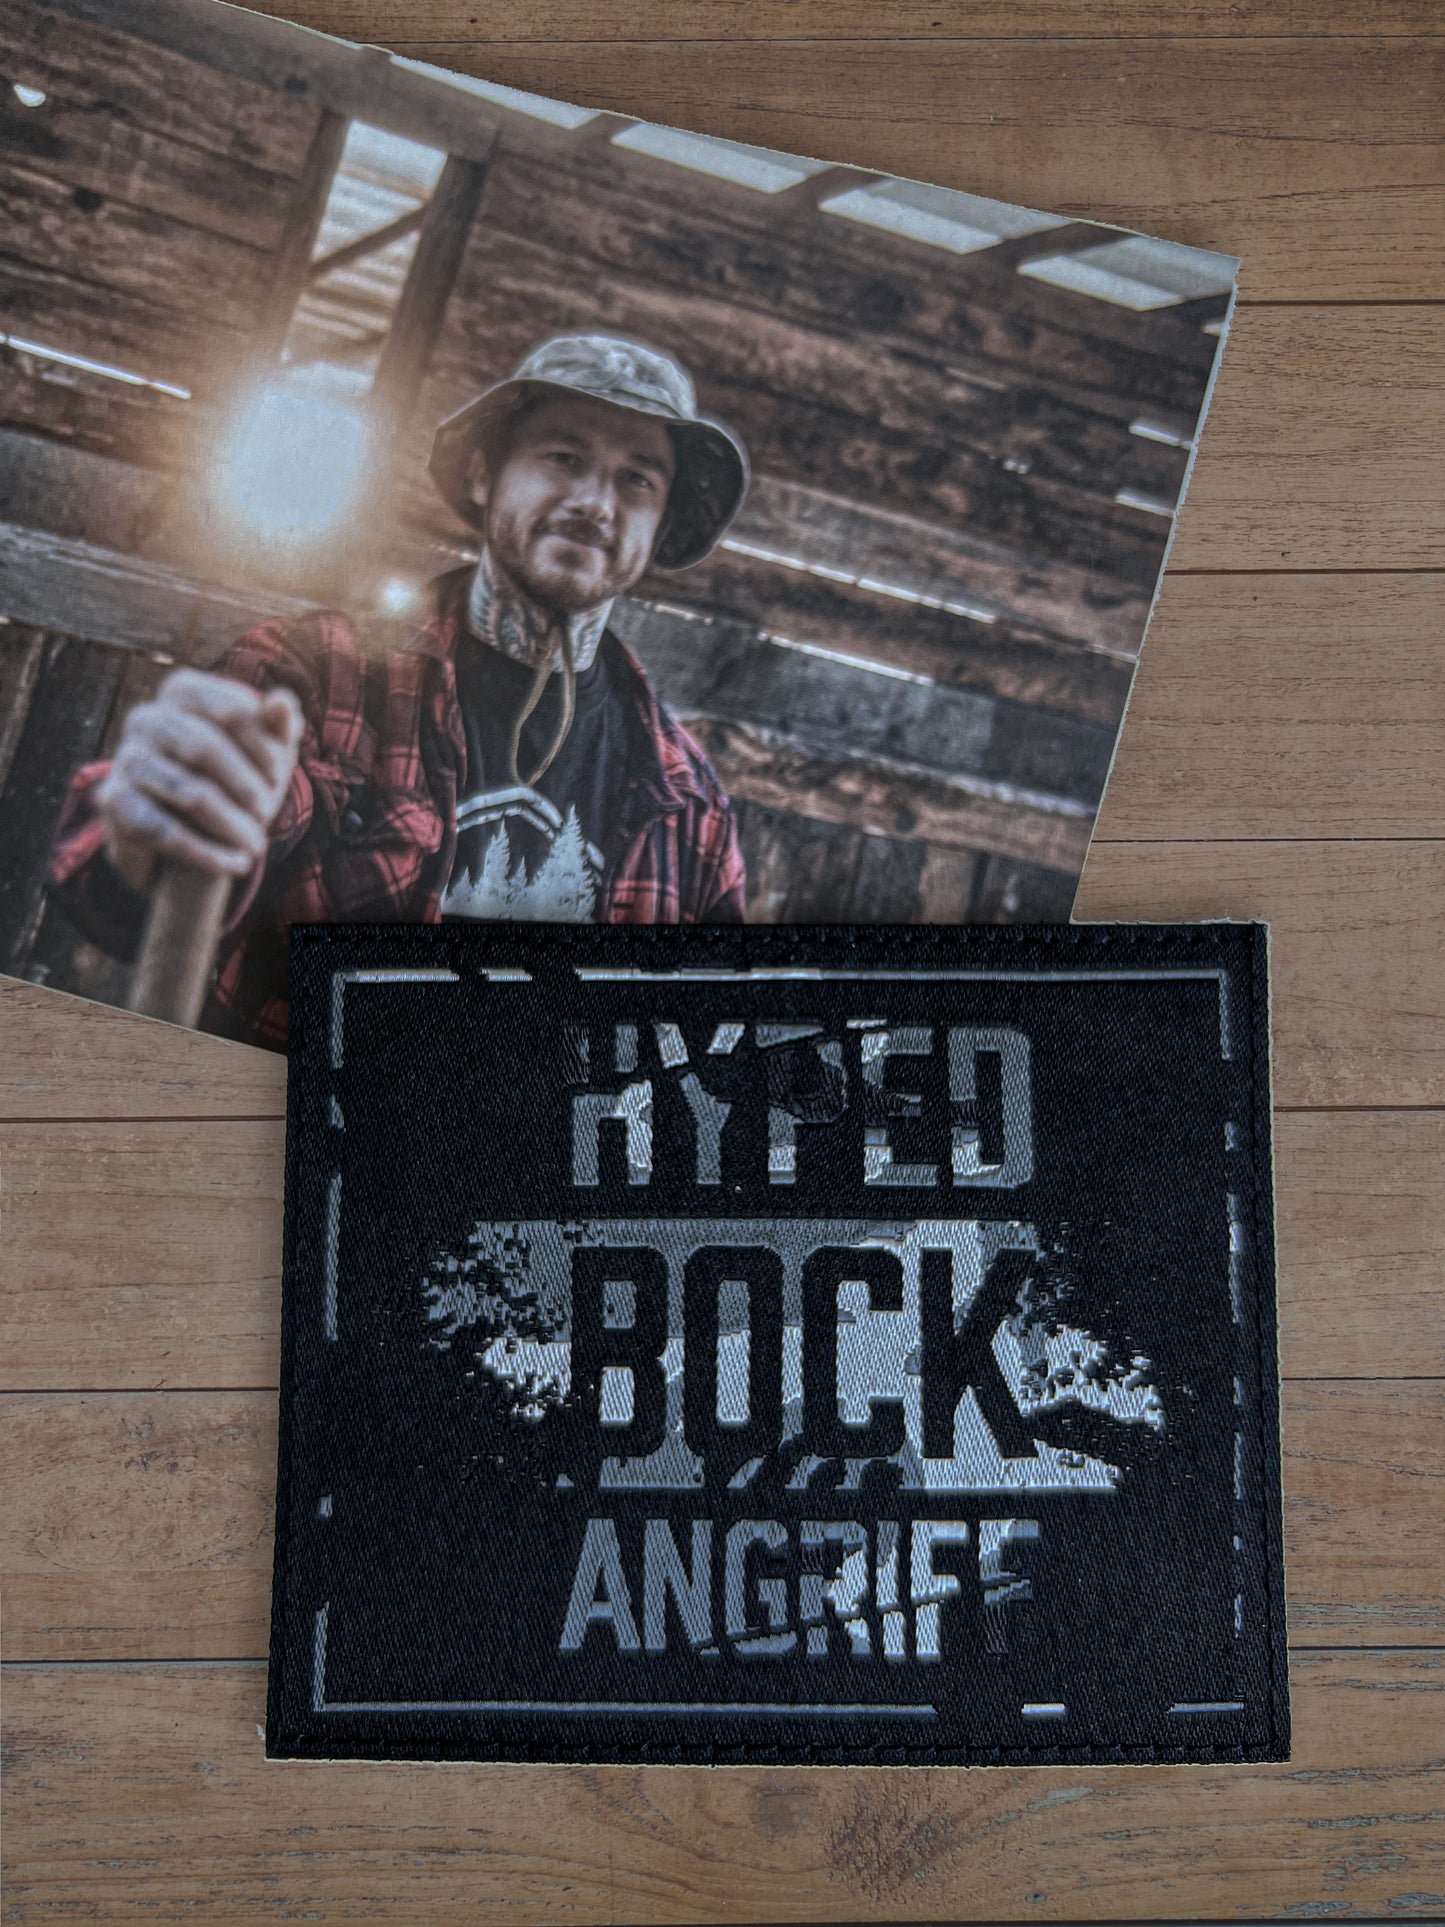 HYPED BOCK ANGRIFF - PATCH